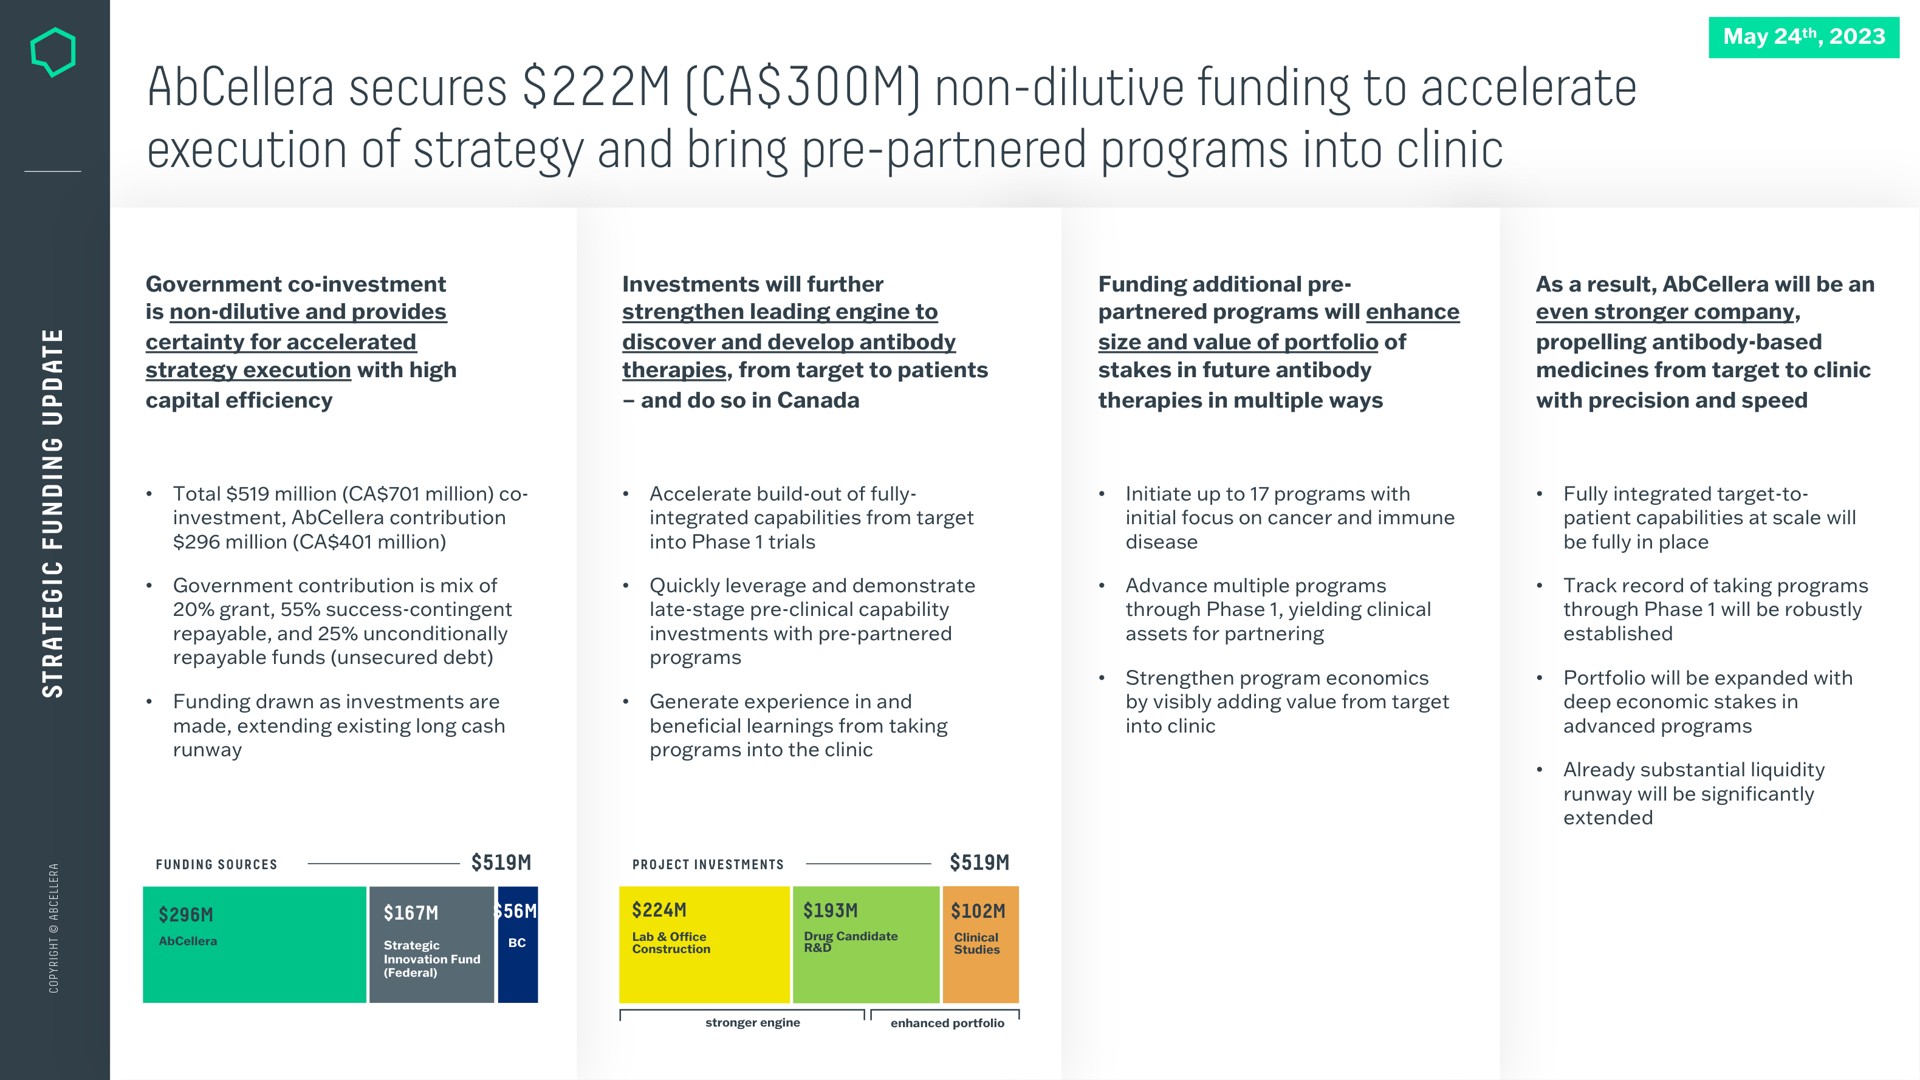 secures non dilutive funding to accelerate execution of strategy and bring partnered programs into clinic cas | AbCellera